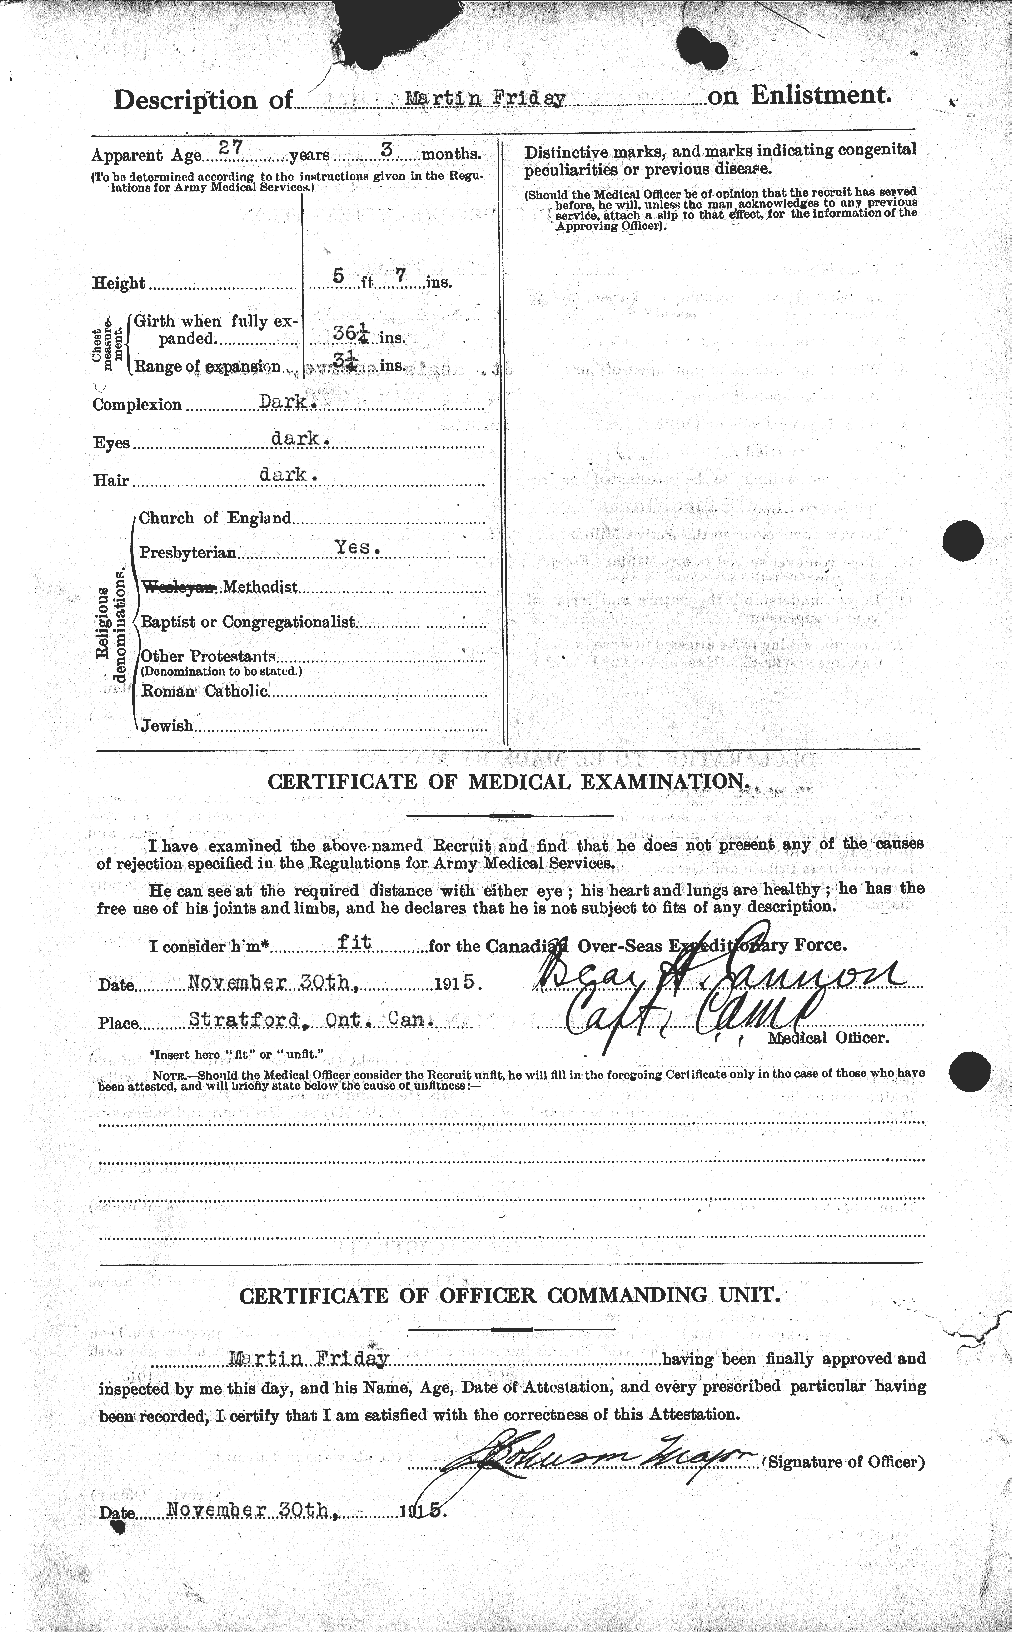 Personnel Records of the First World War - CEF 339729b